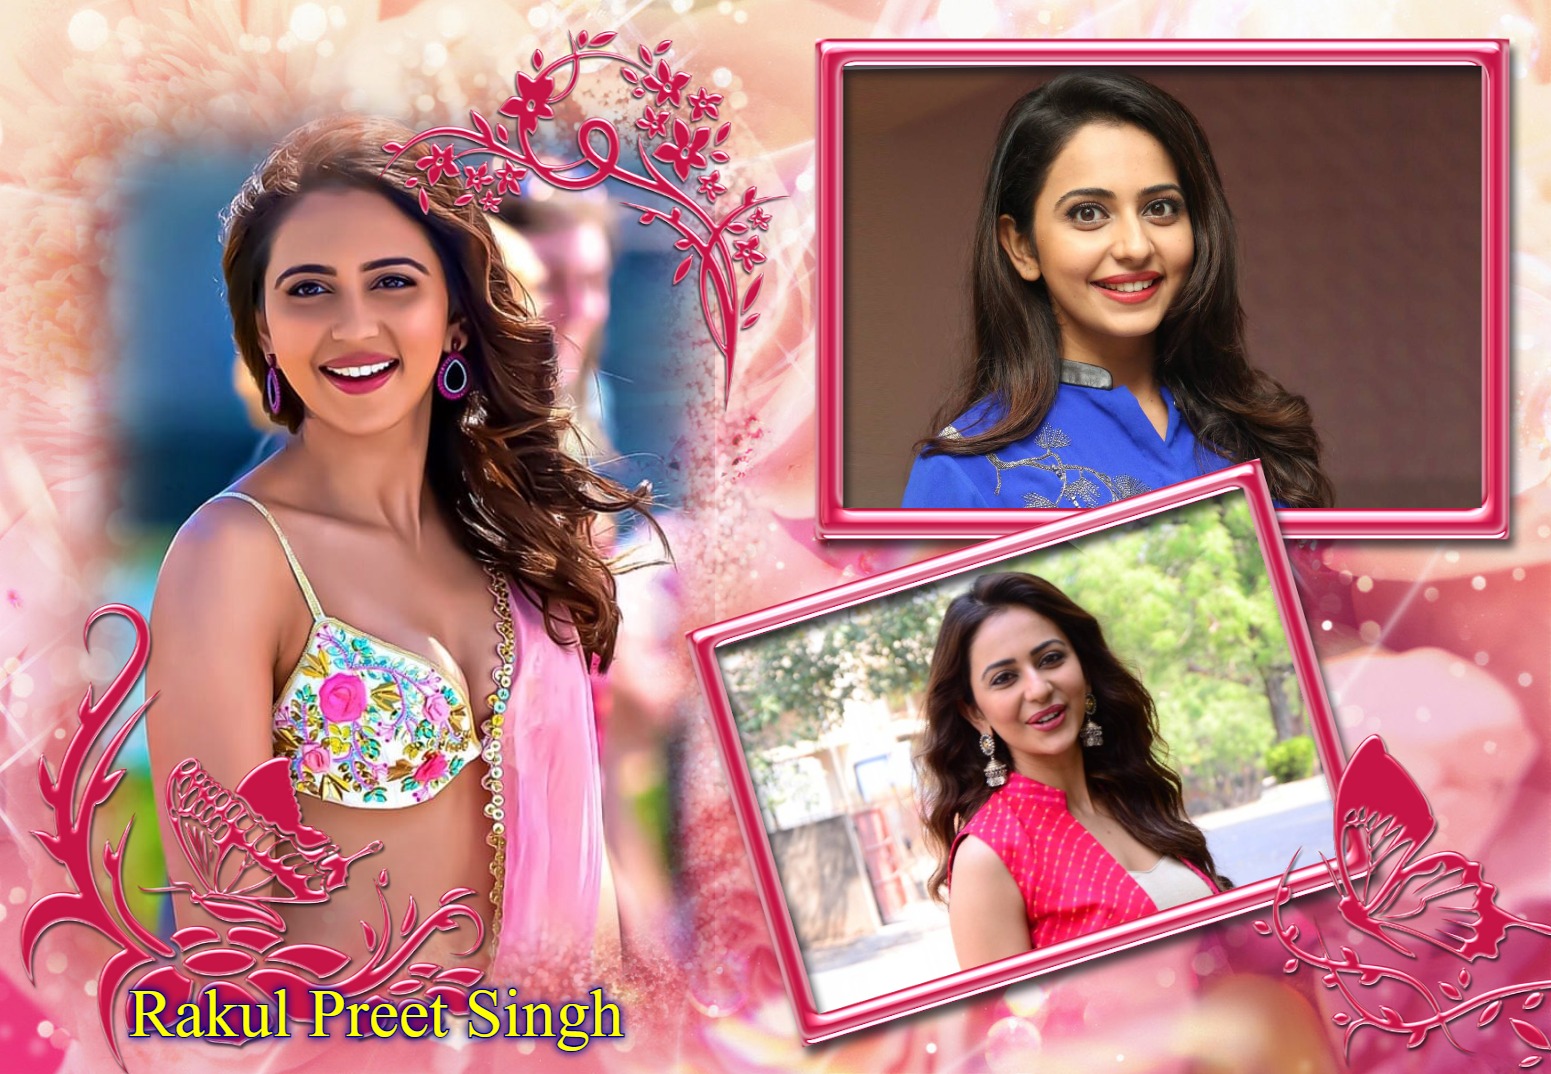 Read more about the article ” Loveliness Personified Cutie- Rakul Preet Singh”